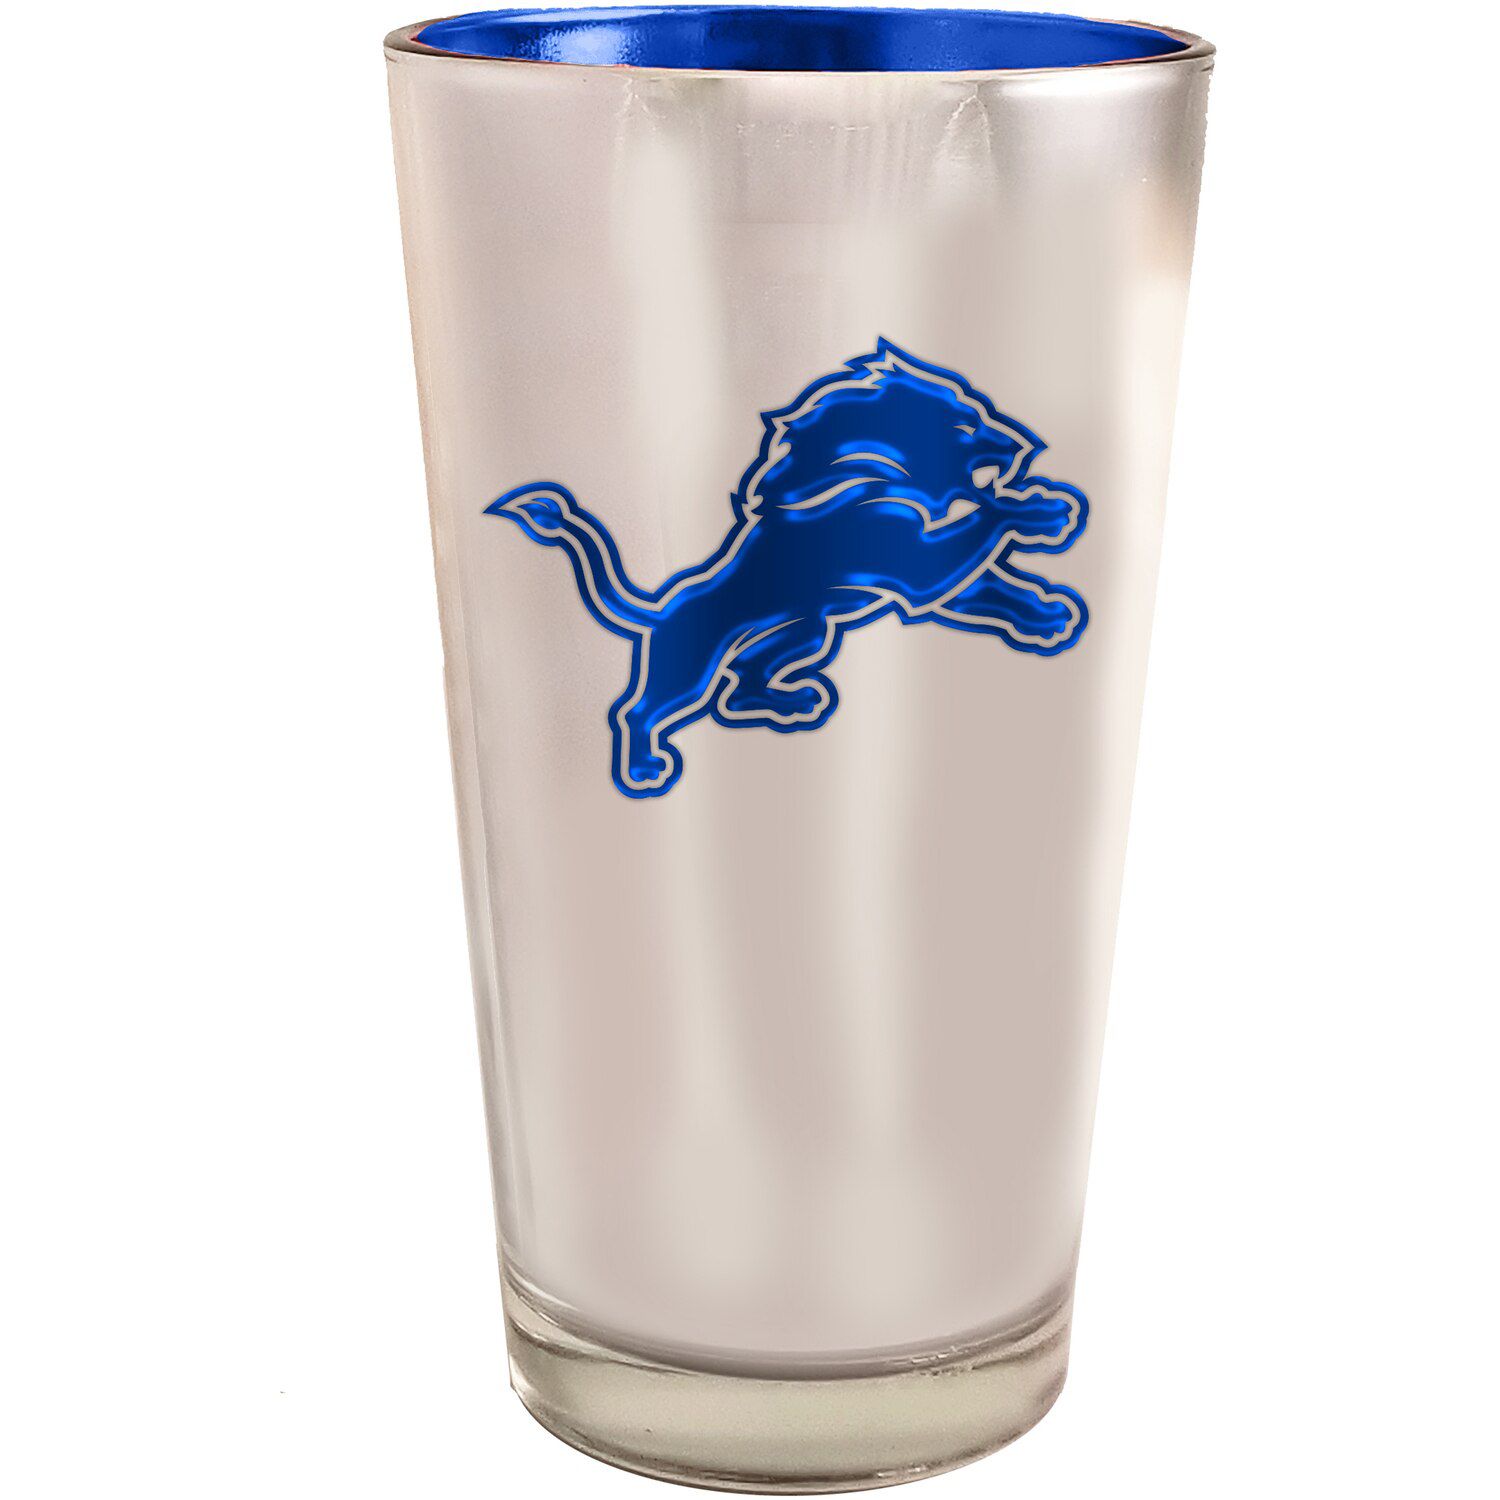 Image for Unbranded Detroit Lions 16oz. Electroplated Pint Glass at Kohl's.